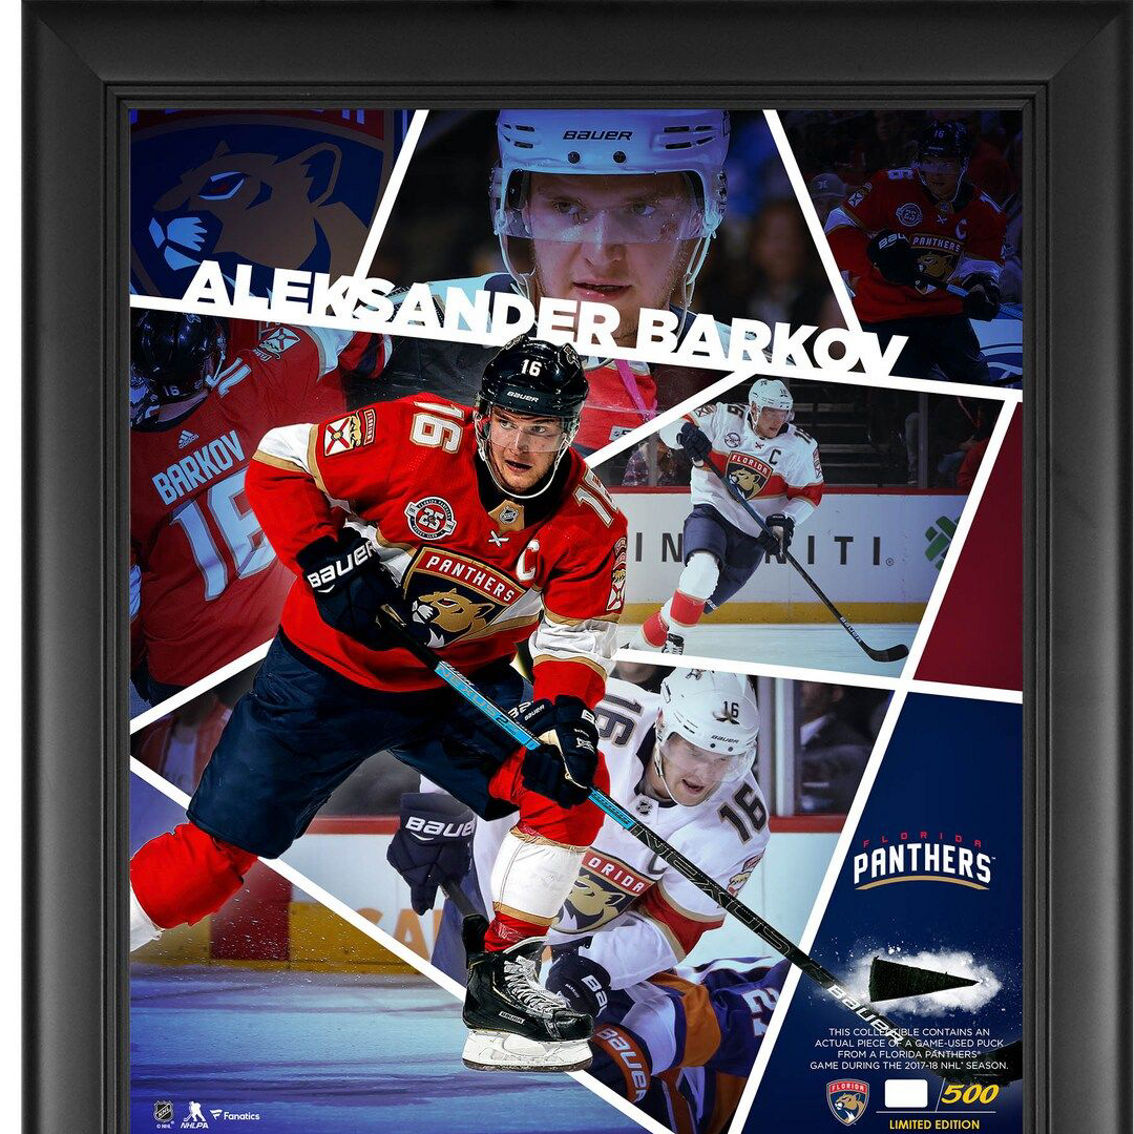 Fanatics Authentic Aleksander Barkov Florida Panthers Framed 15'' x 17'' Impact Player Collage with a Piece of Game-Used Puck - Limited Edition of 500 - Image 2 of 2